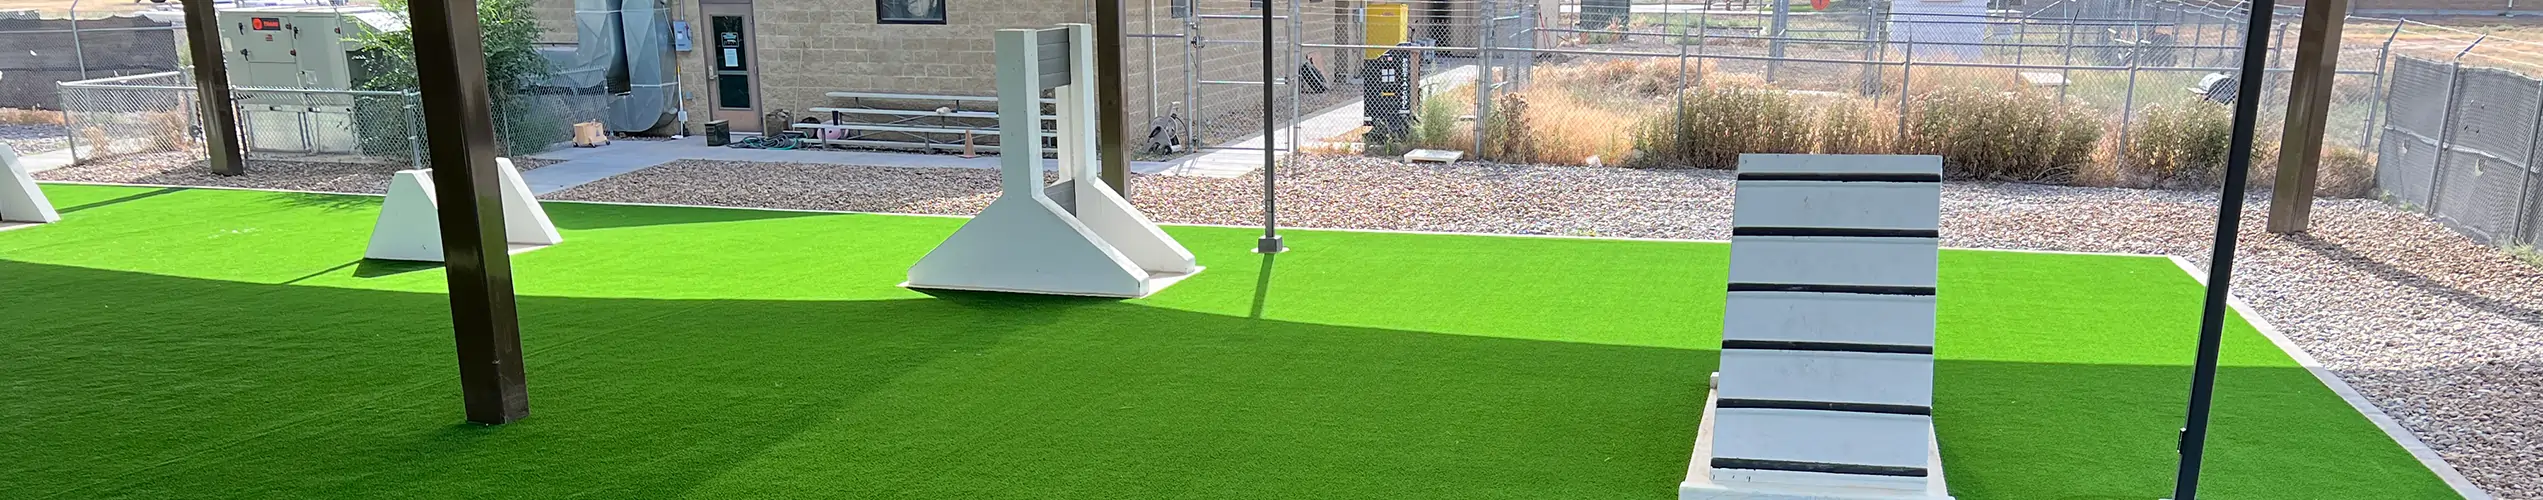 Artificial pet grass lawn from SYNLawn